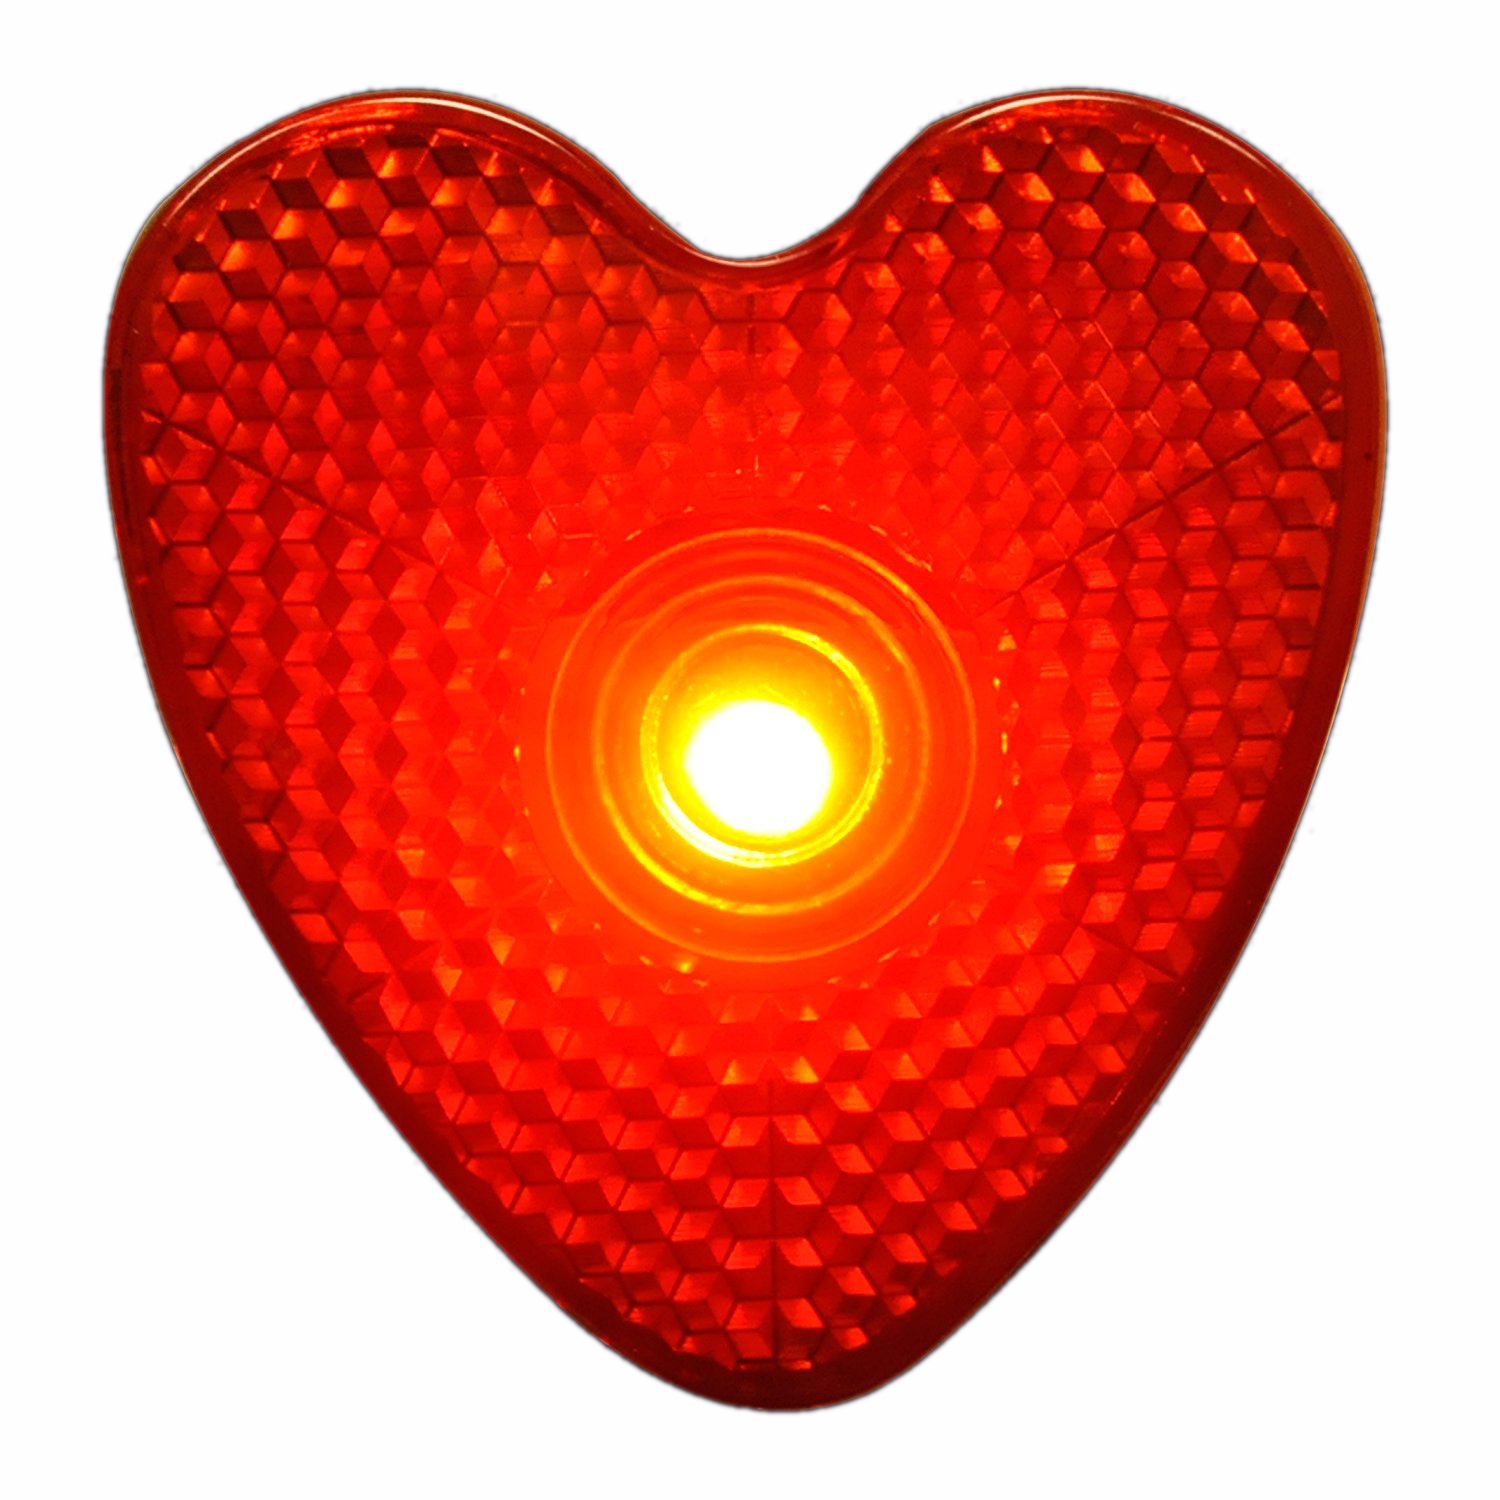 LED Blinking Red Heart Reflector Clip Running Body Light All Products